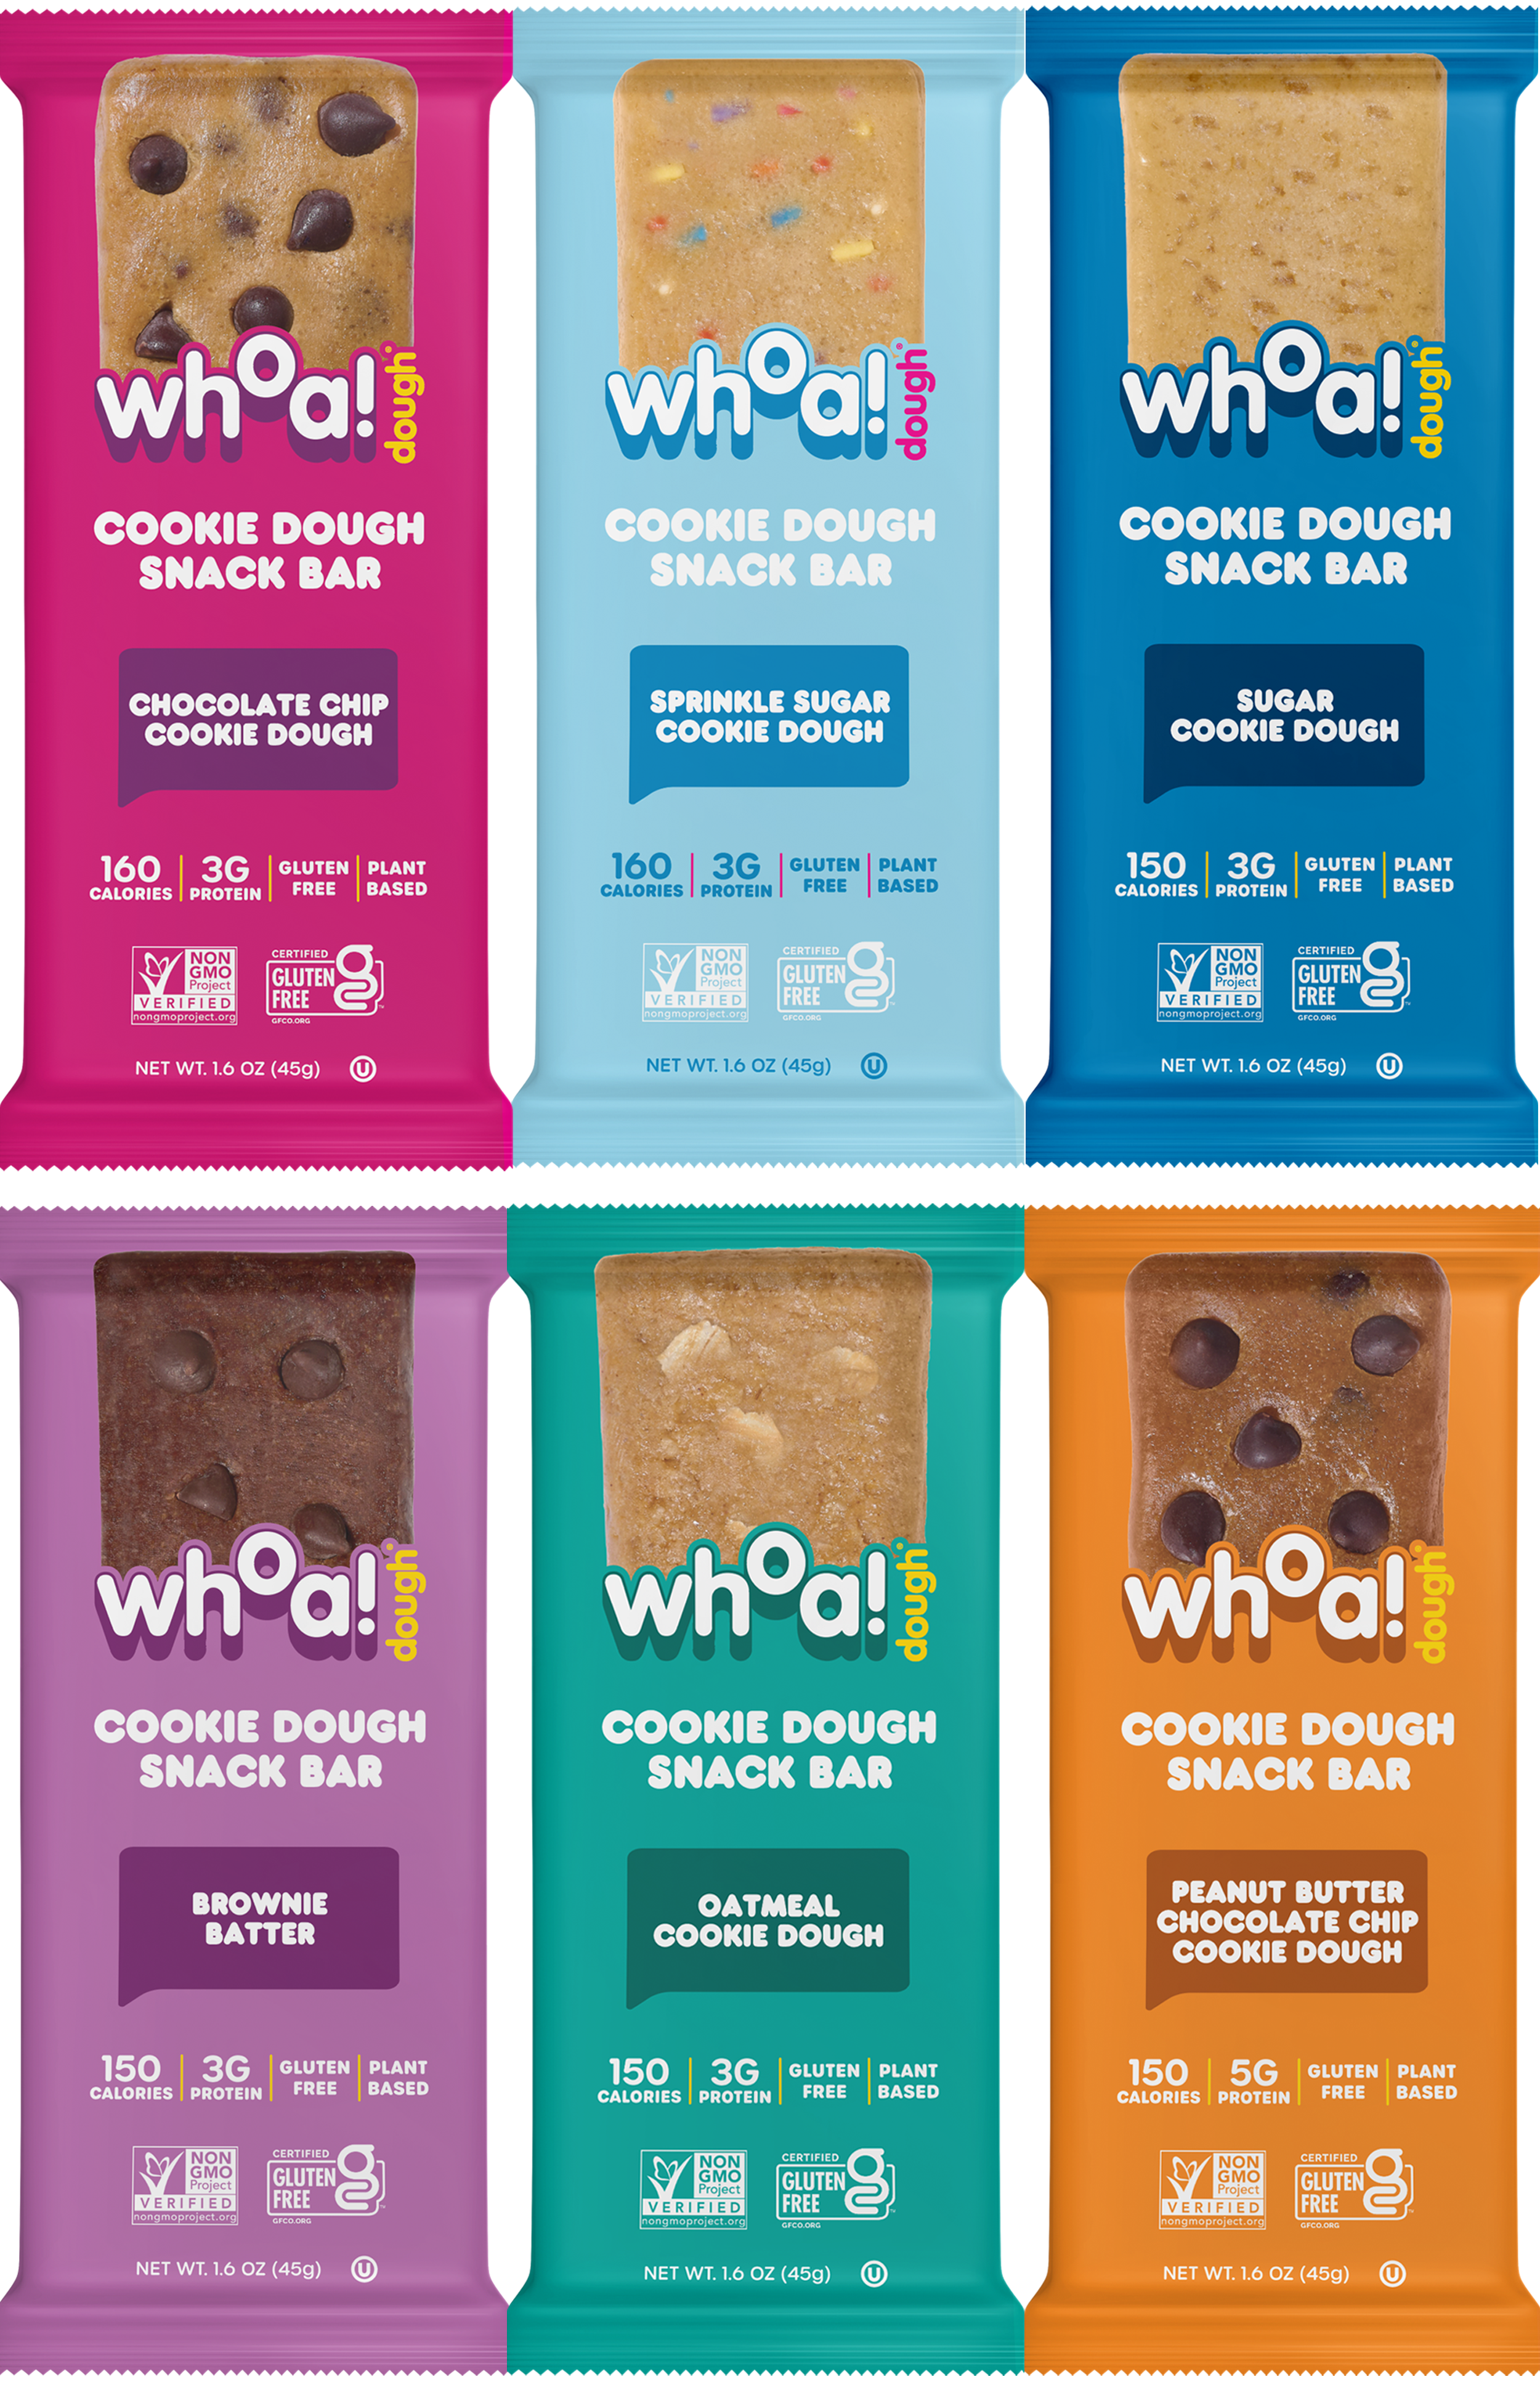 The Whoa! Dough Variety Pack